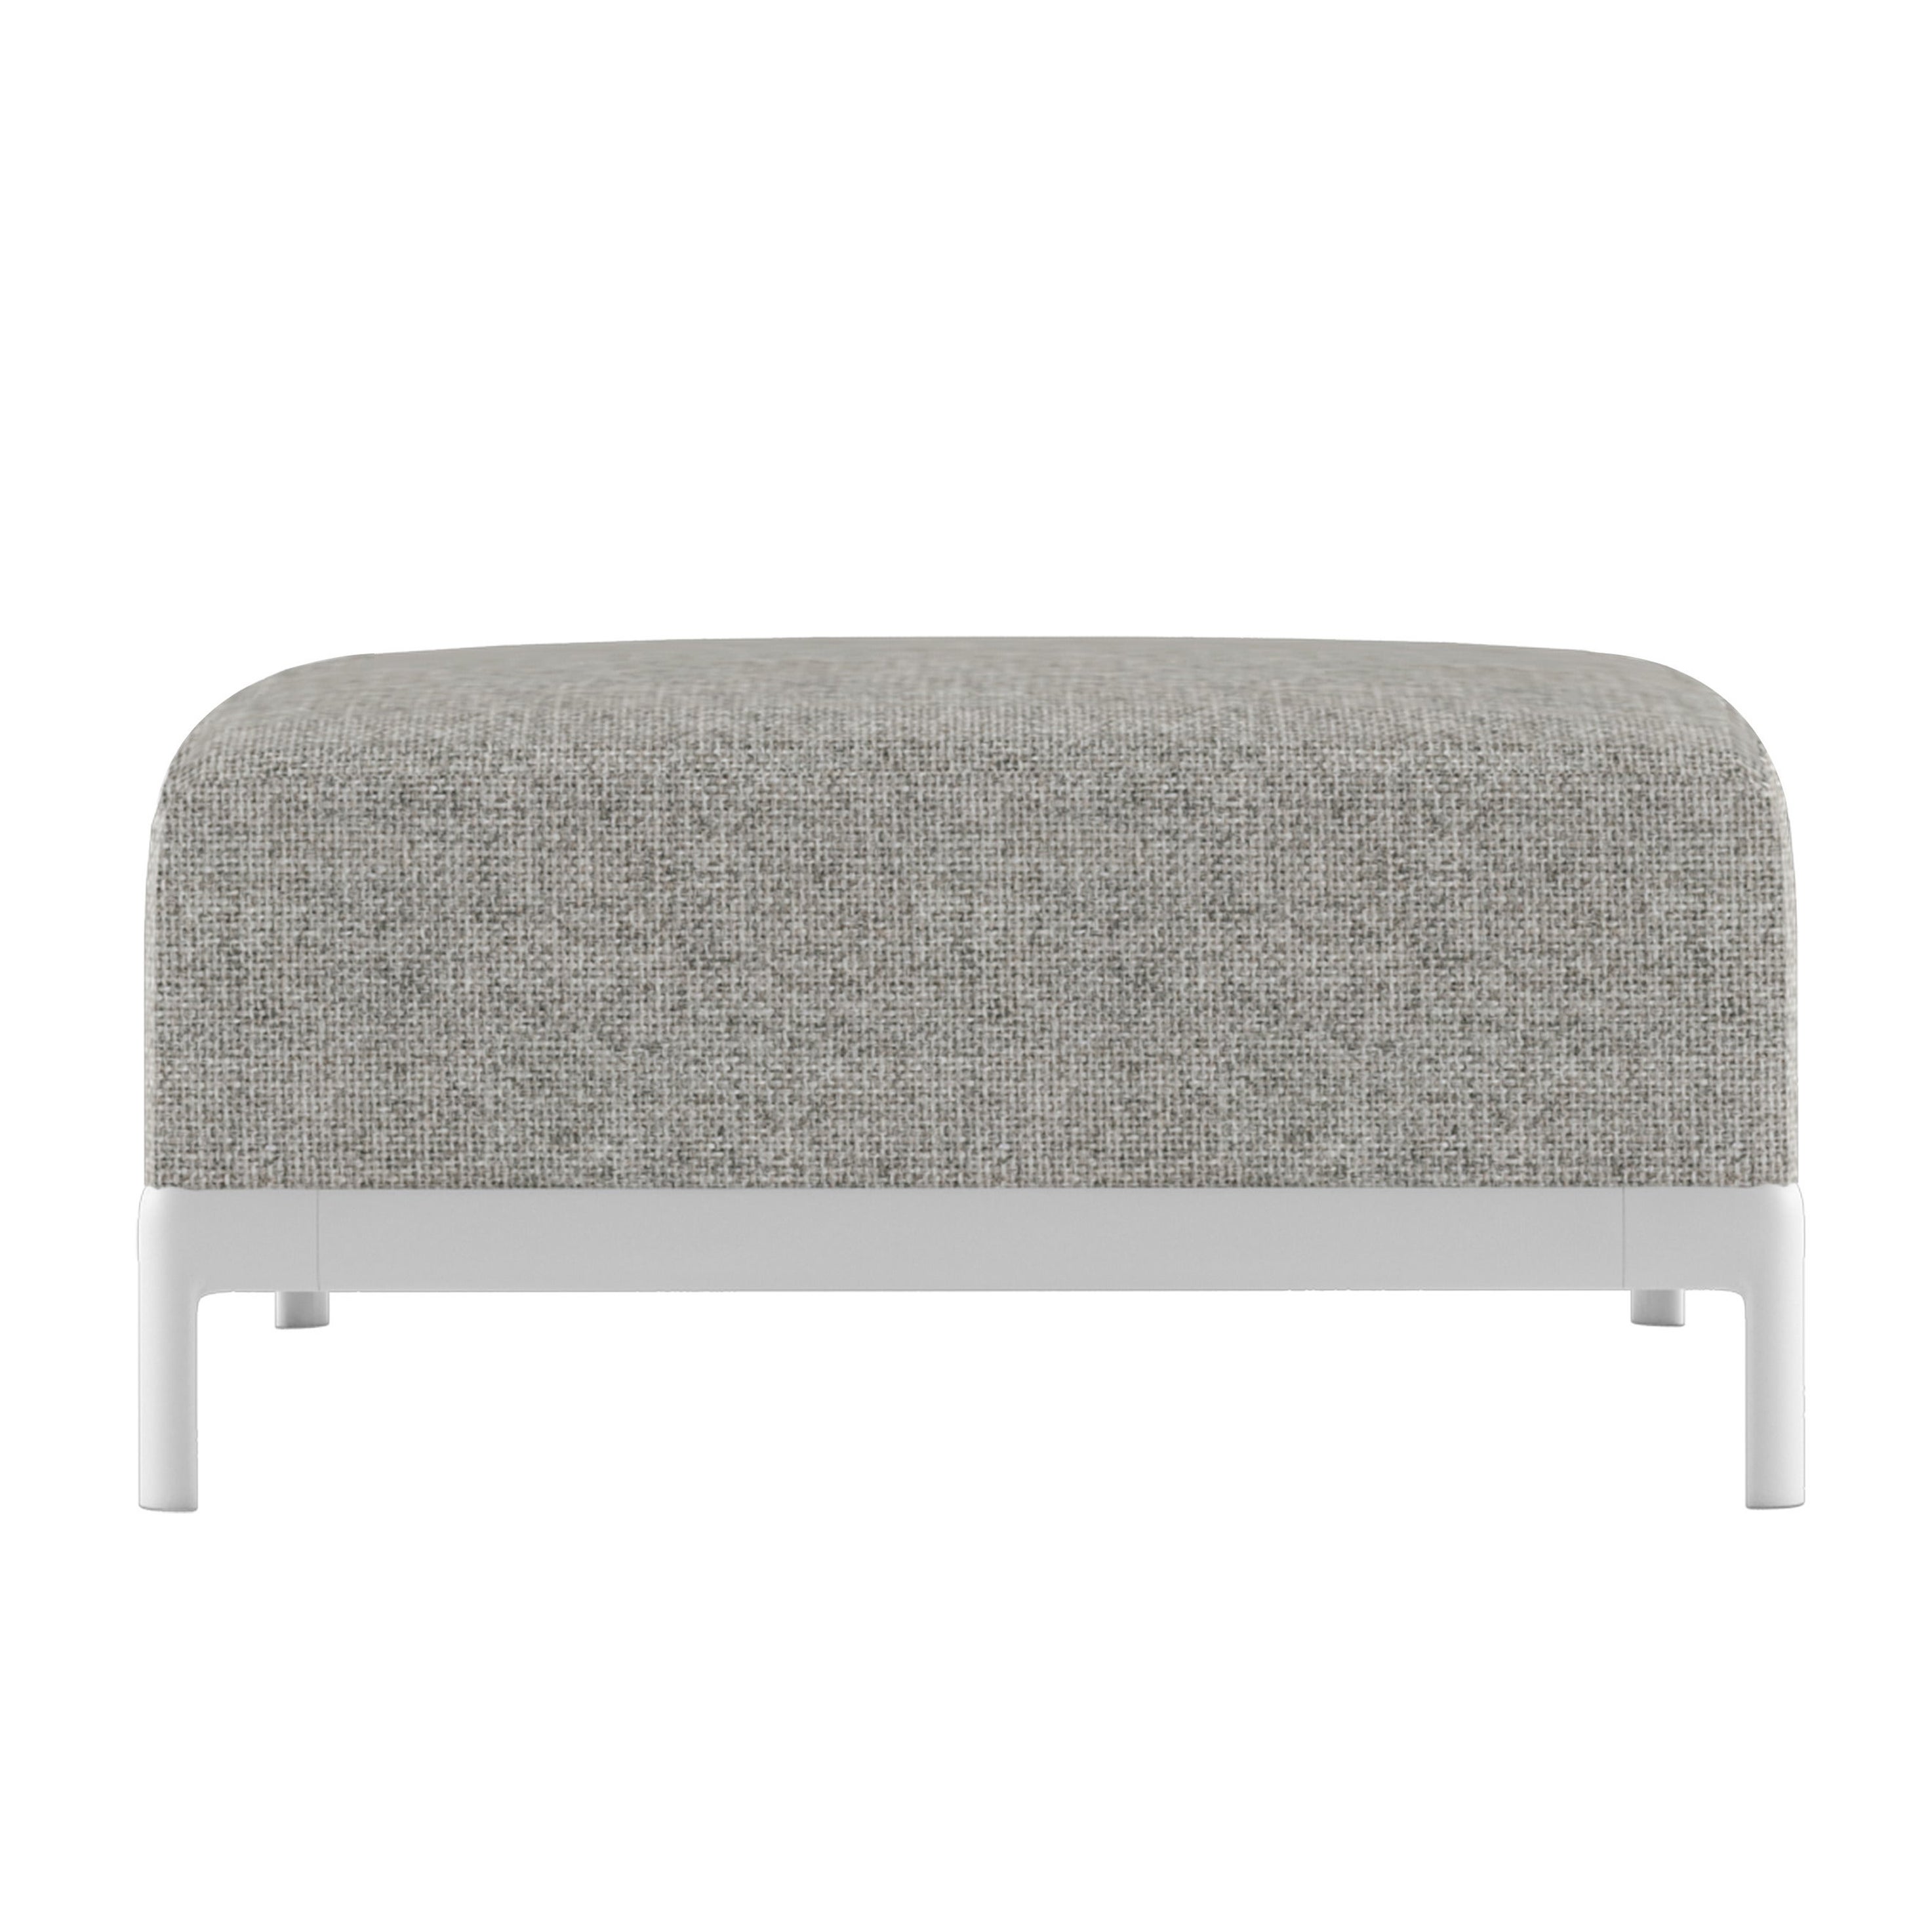 Alias P70 AluZen Soft Pouf Sofa Outdoor in Upholstery with Aluminium Frame For Sale